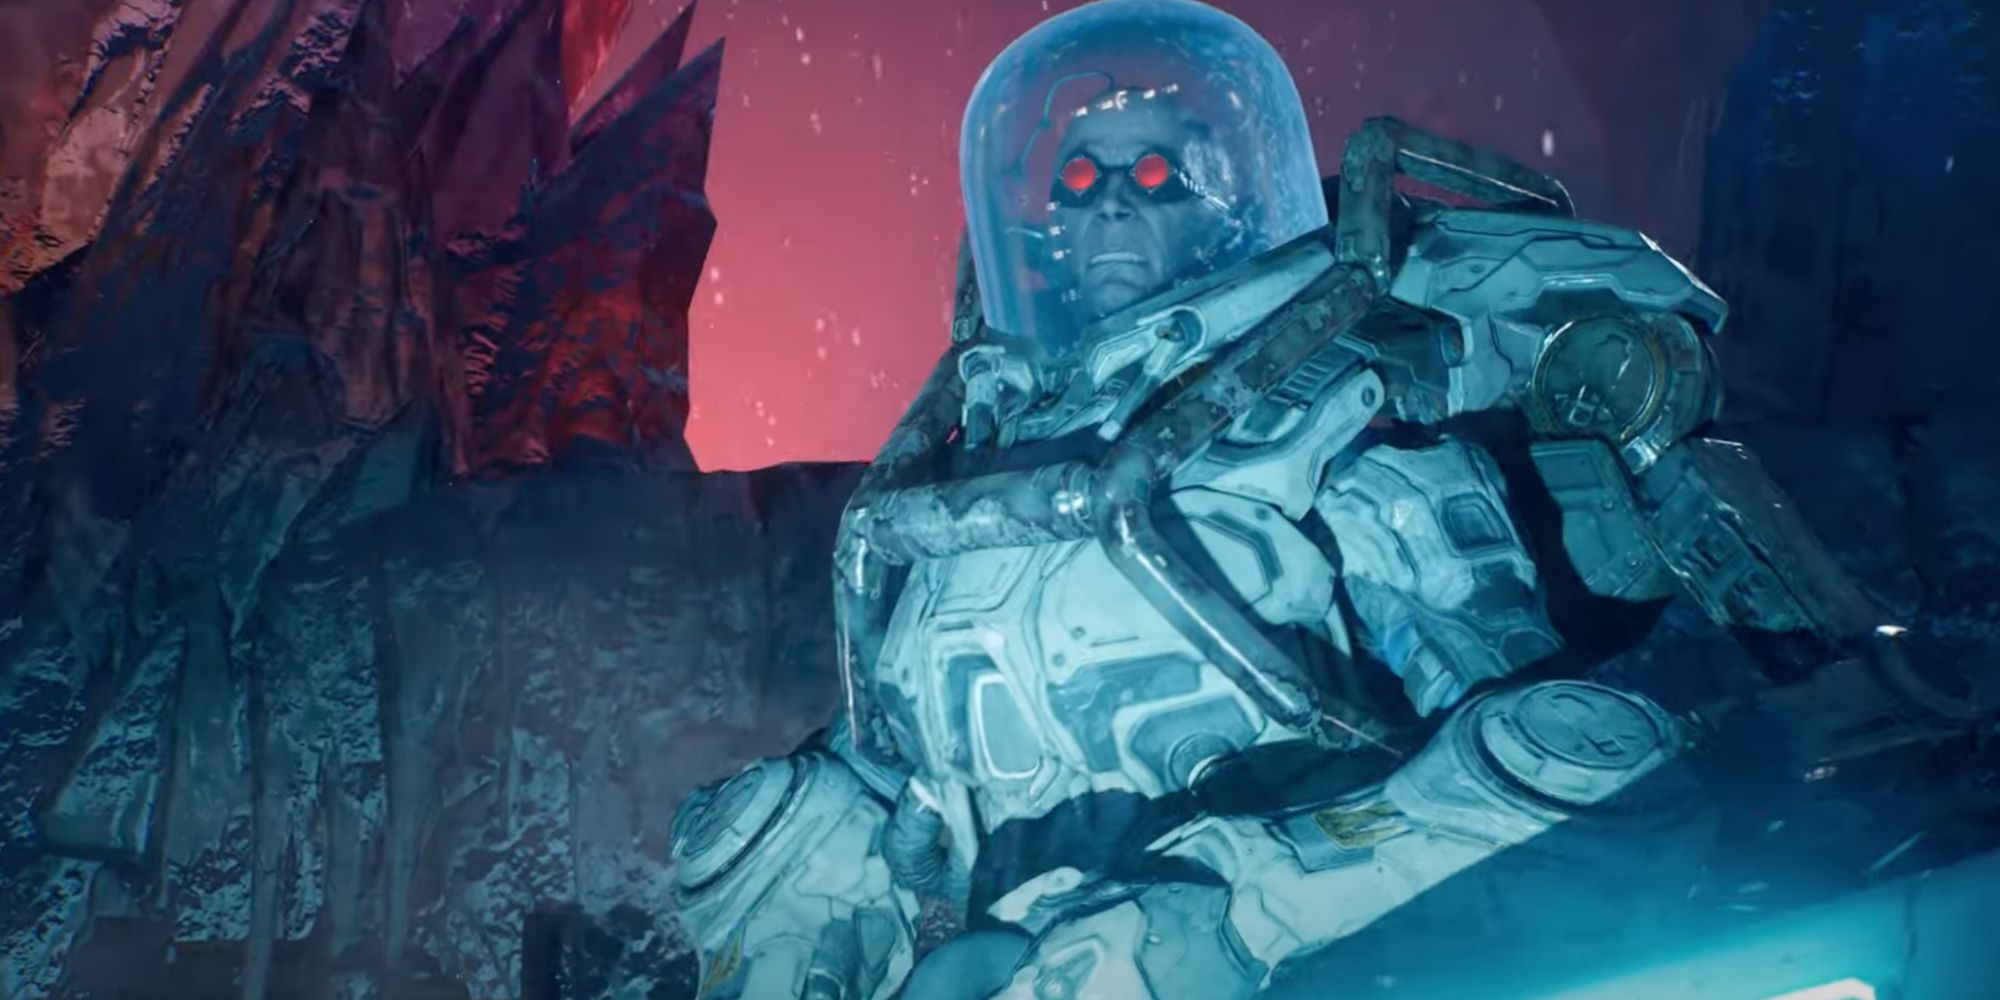 gotham knights mister freeze boss with his helmet on preparing his freezing weapon